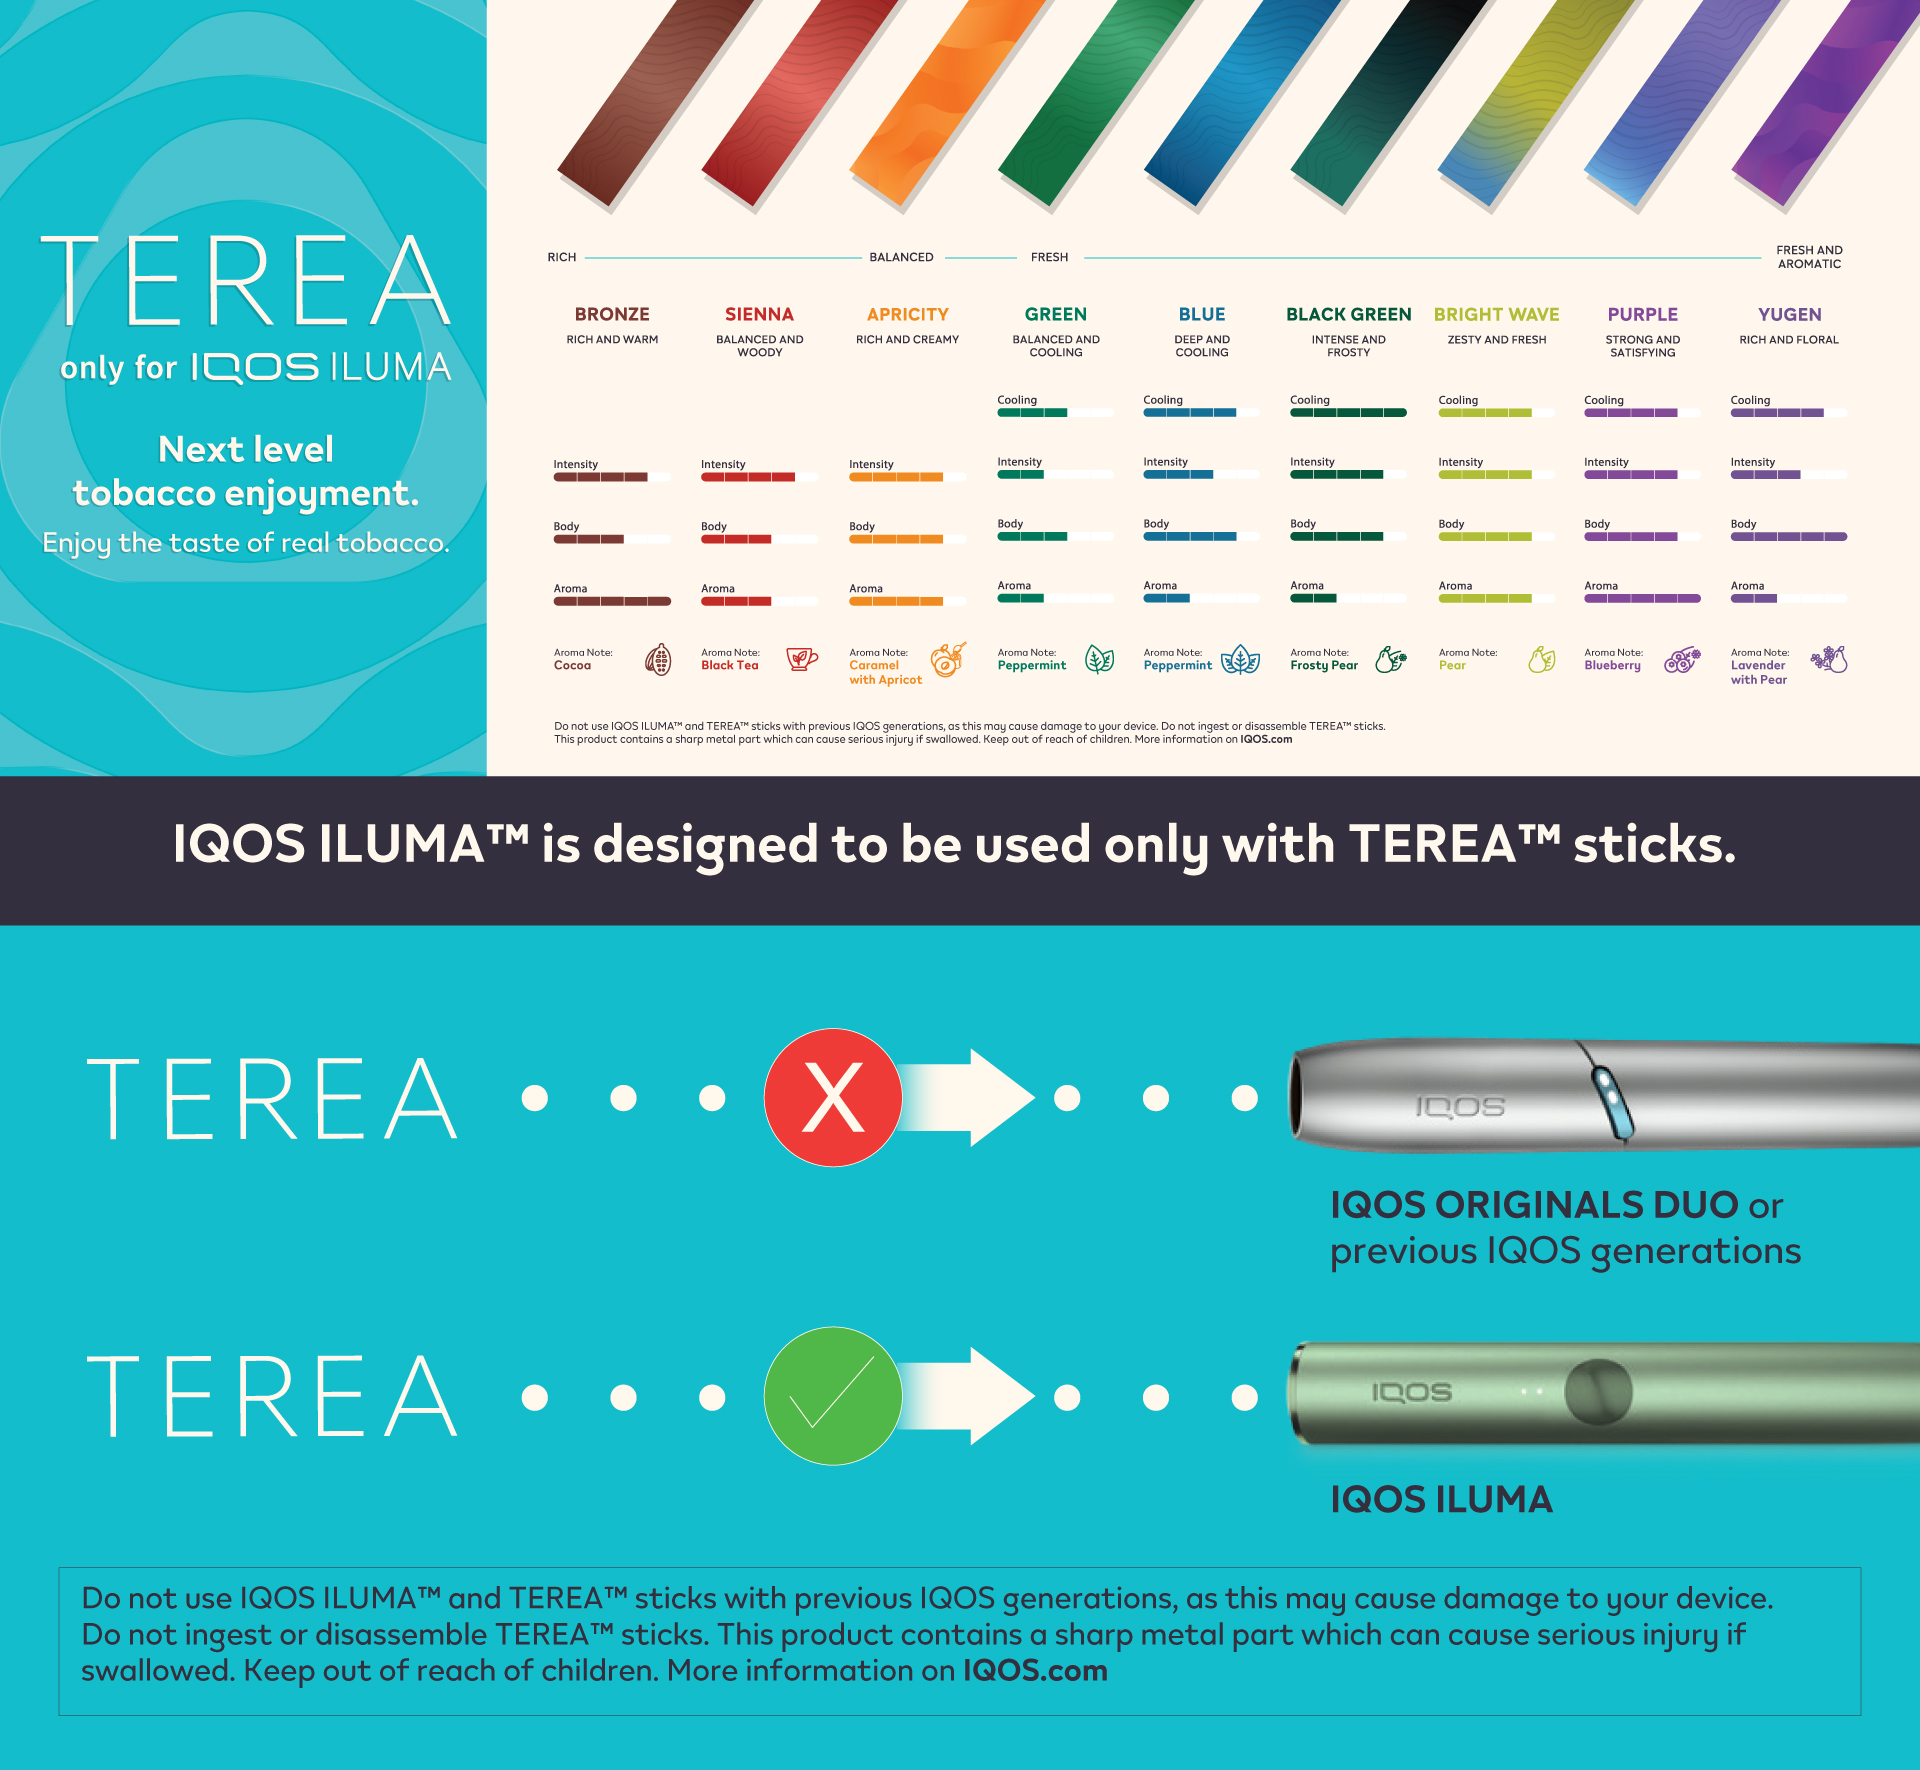 https://www.iqos.com/content/dam/iqos/local/indonesia/en/home/loyalty/dashboard/earning-actions/watch-video6/Content%202%20-%20TEREA-02.jpg